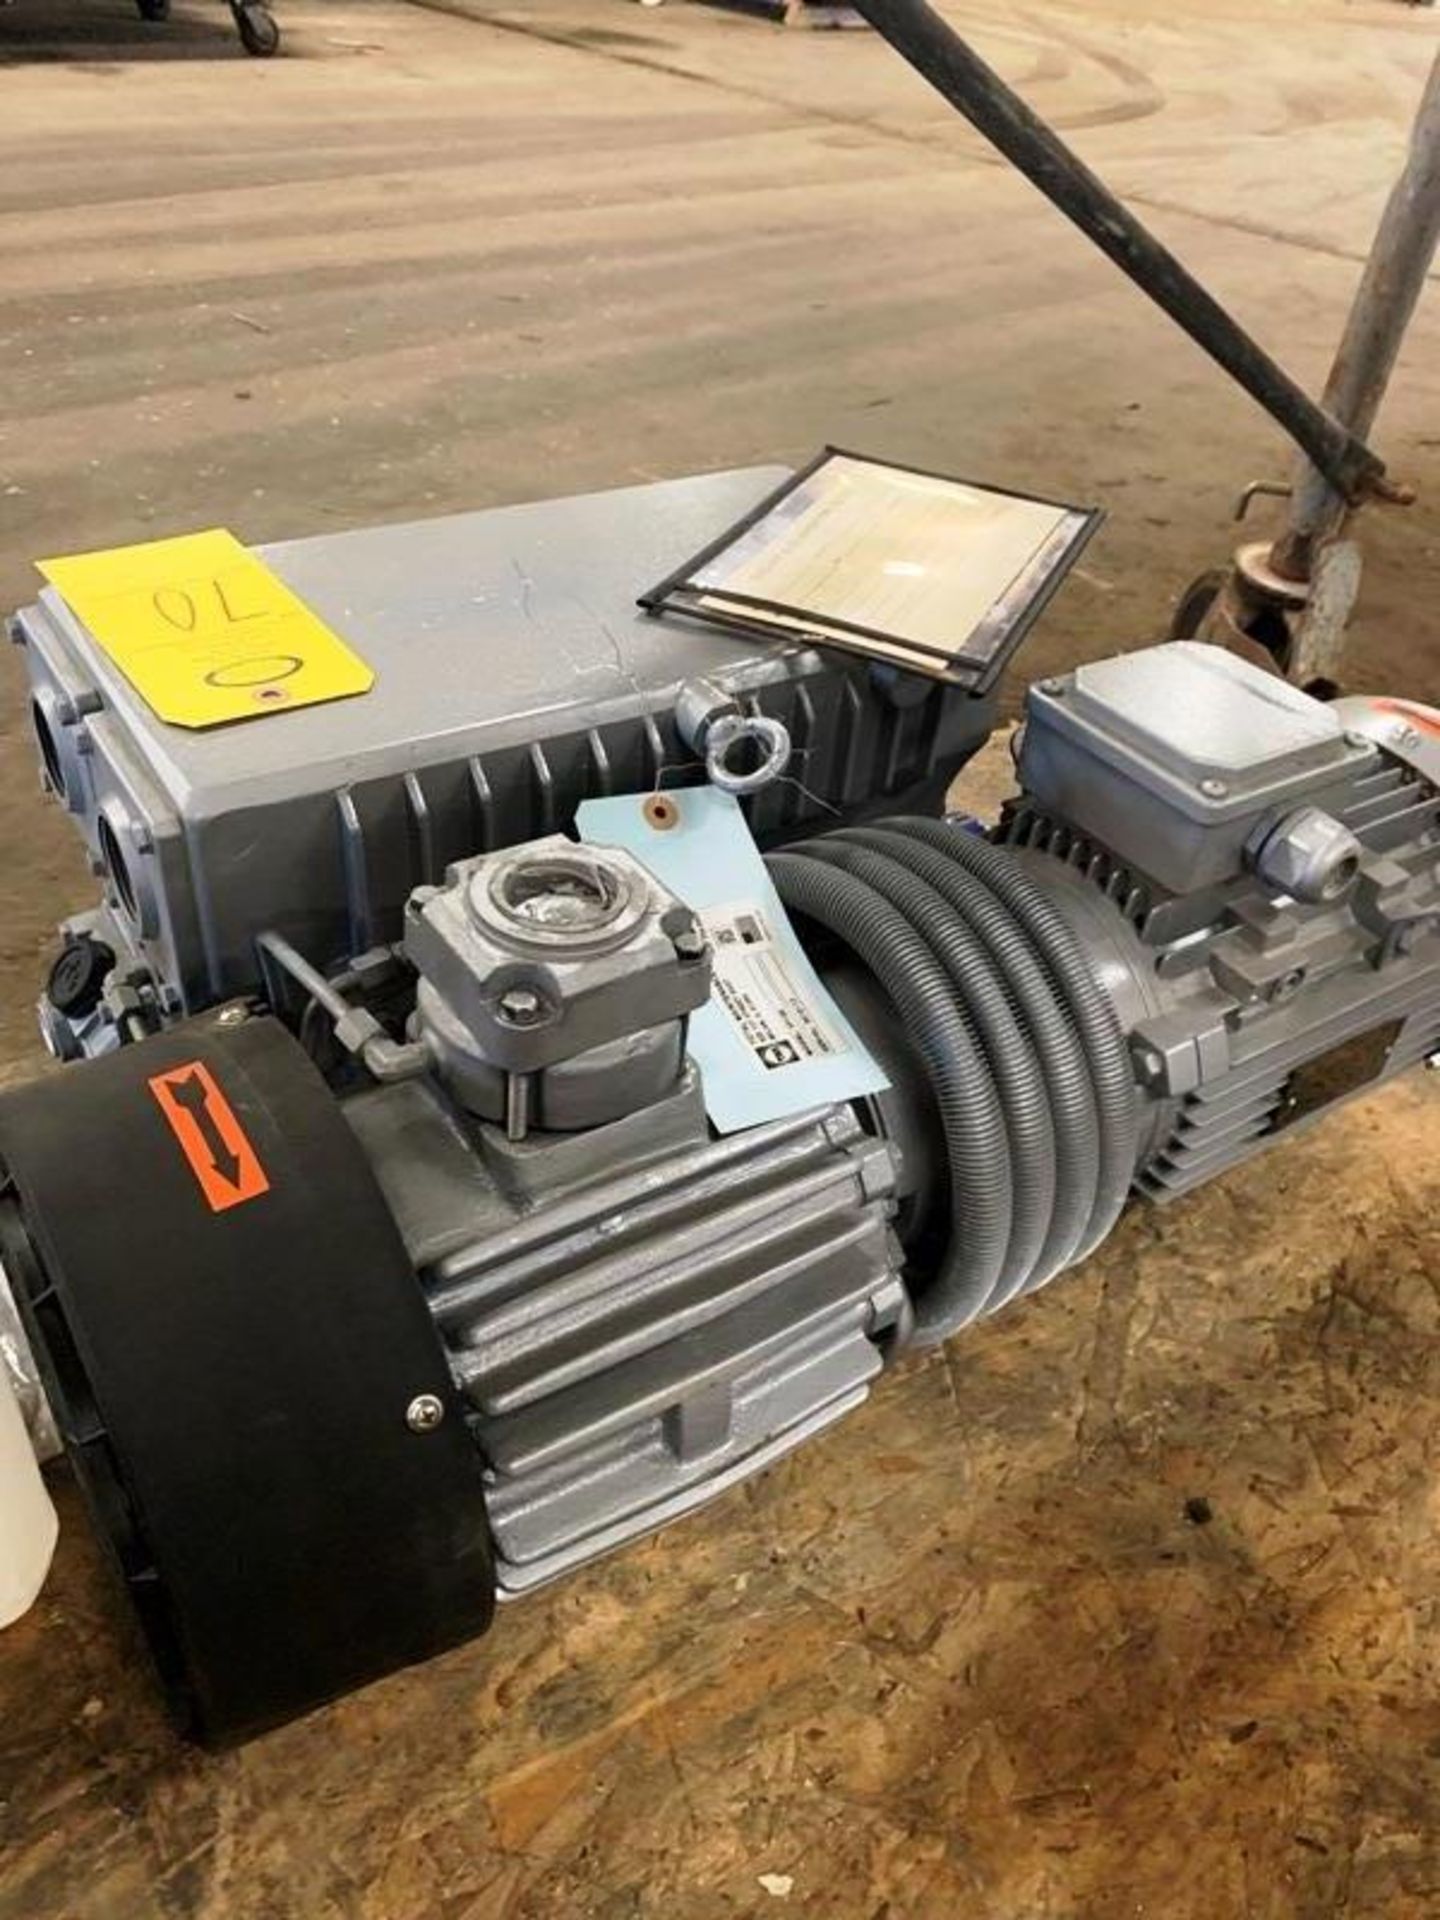 New SV Series Rotary Vane Vacuum Pump, Ser. #5610113, 3 phase, 230/460 volts, new air filter (1) - Image 2 of 4